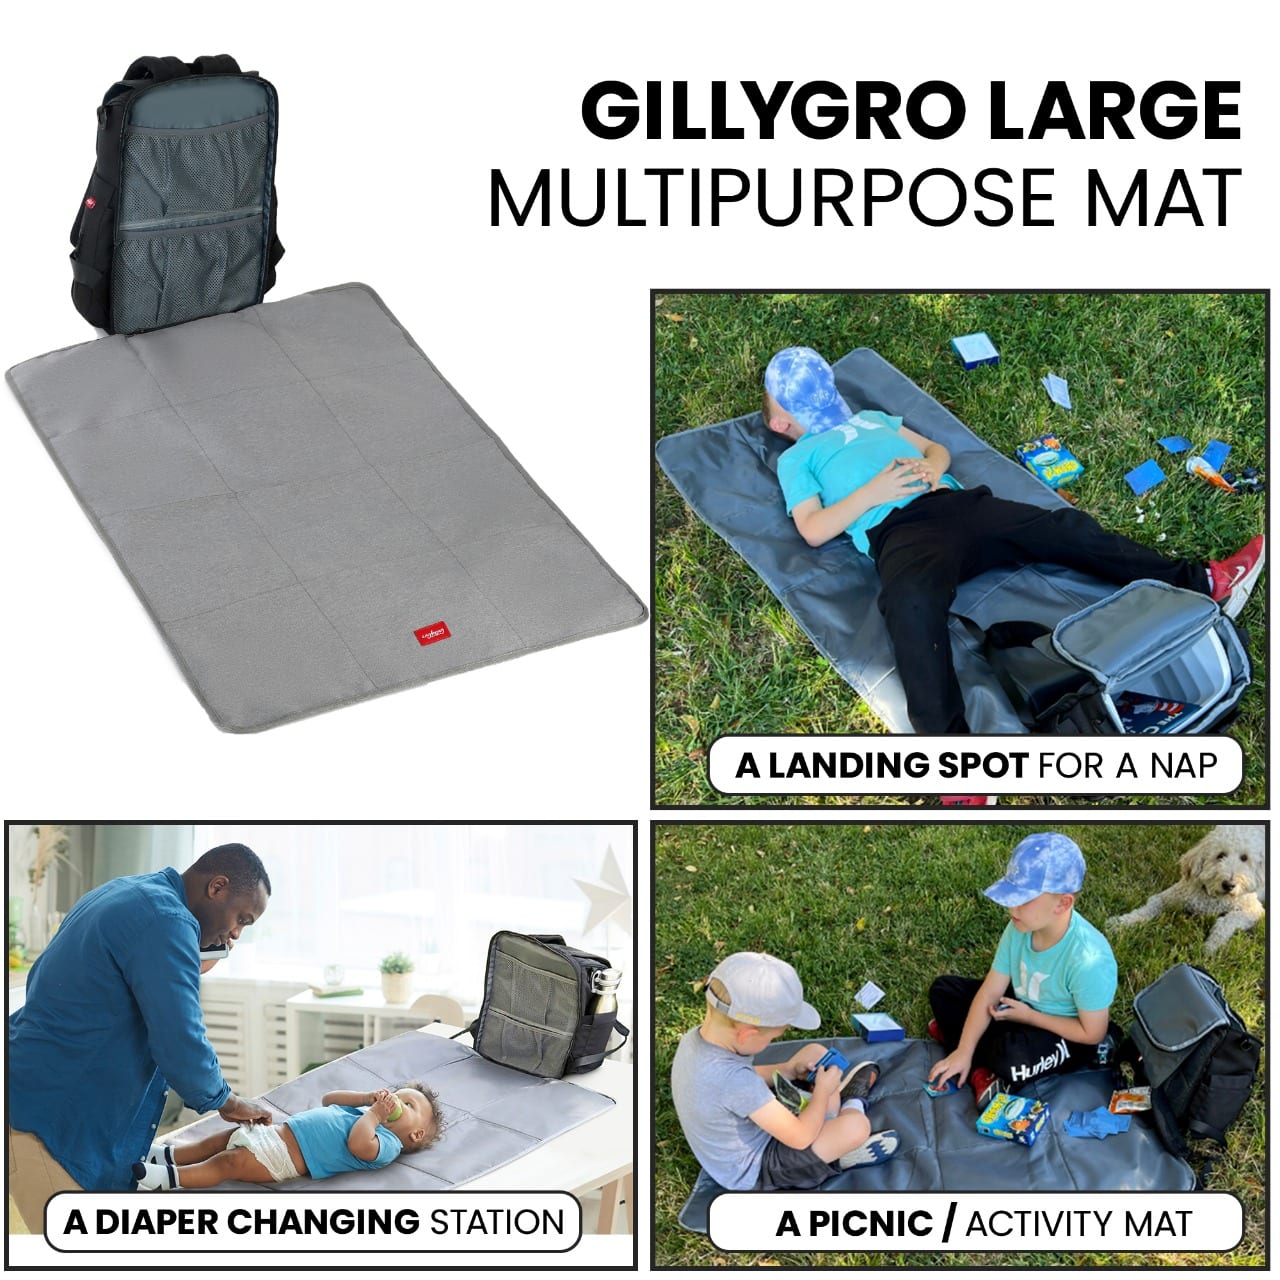 GillyGro Small Backpack Organizer Insert for Diaper Bag, Tote, Handbag, Rucksack - Hanging Purse Insert with Insulated Bottle Pockets & Waterproof